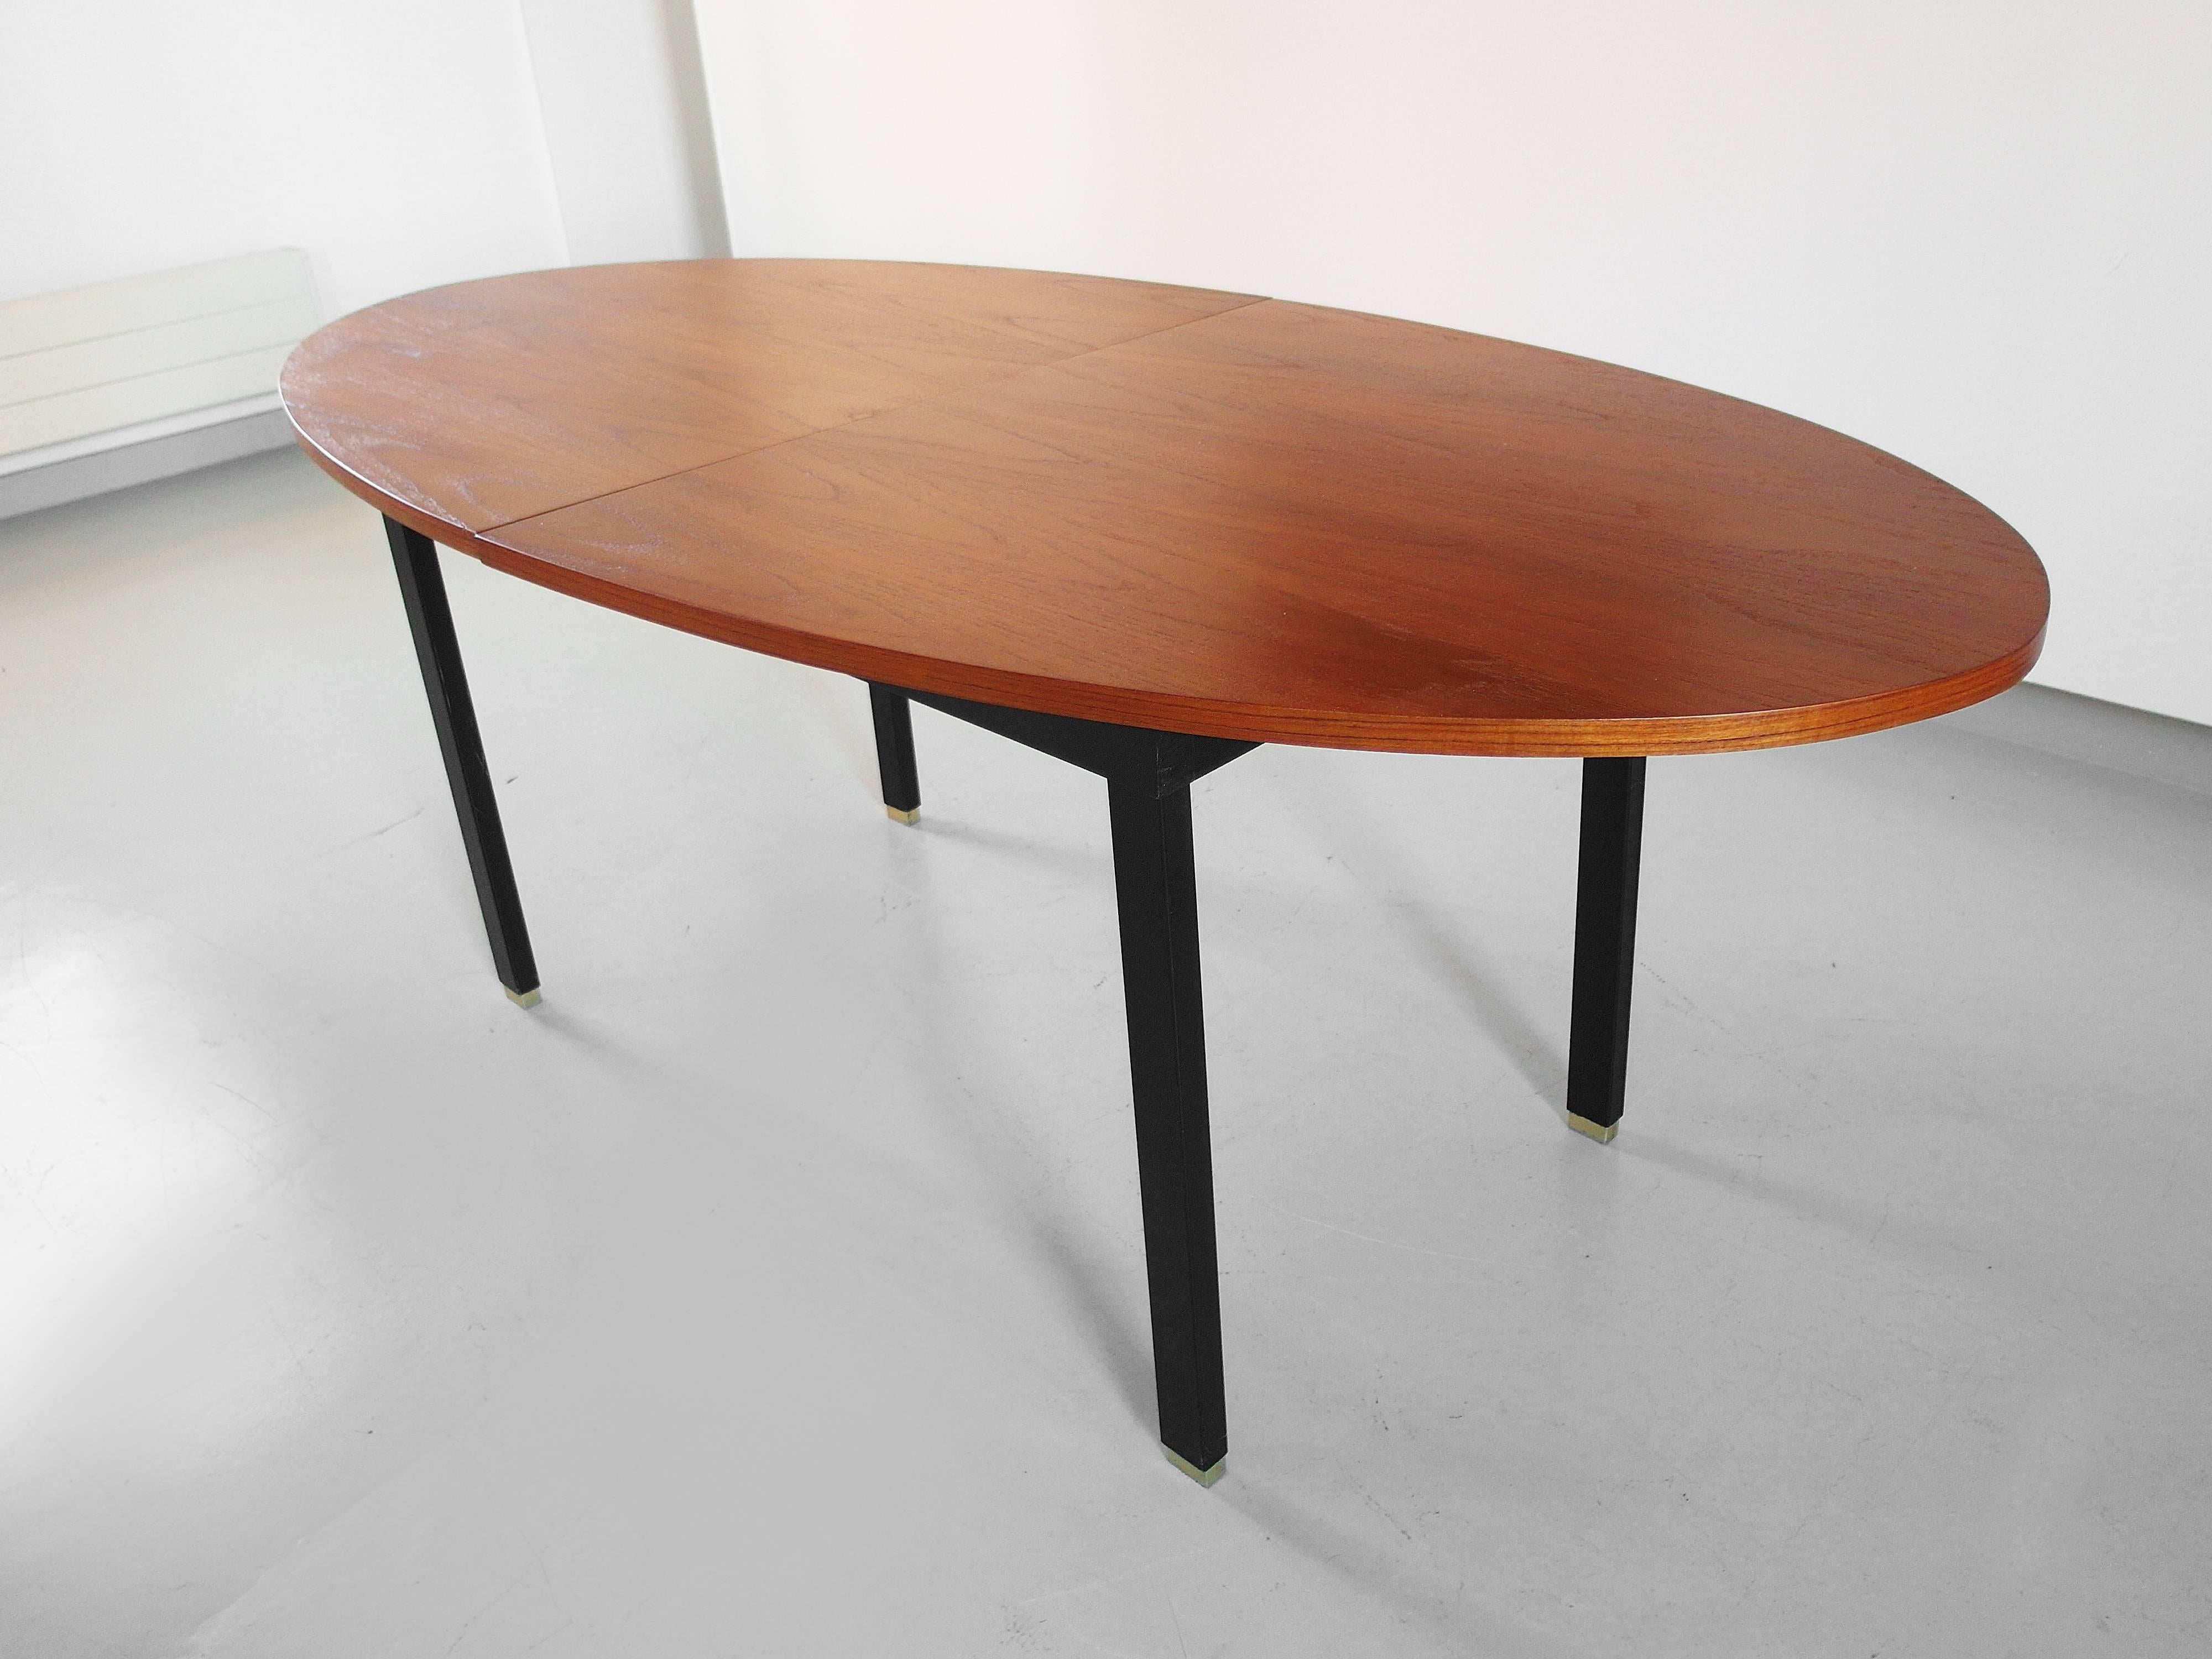 Mid-Century Modern Extendable Oval Dining Table with Teak Top and Brass Feet, Belgium, 1960s